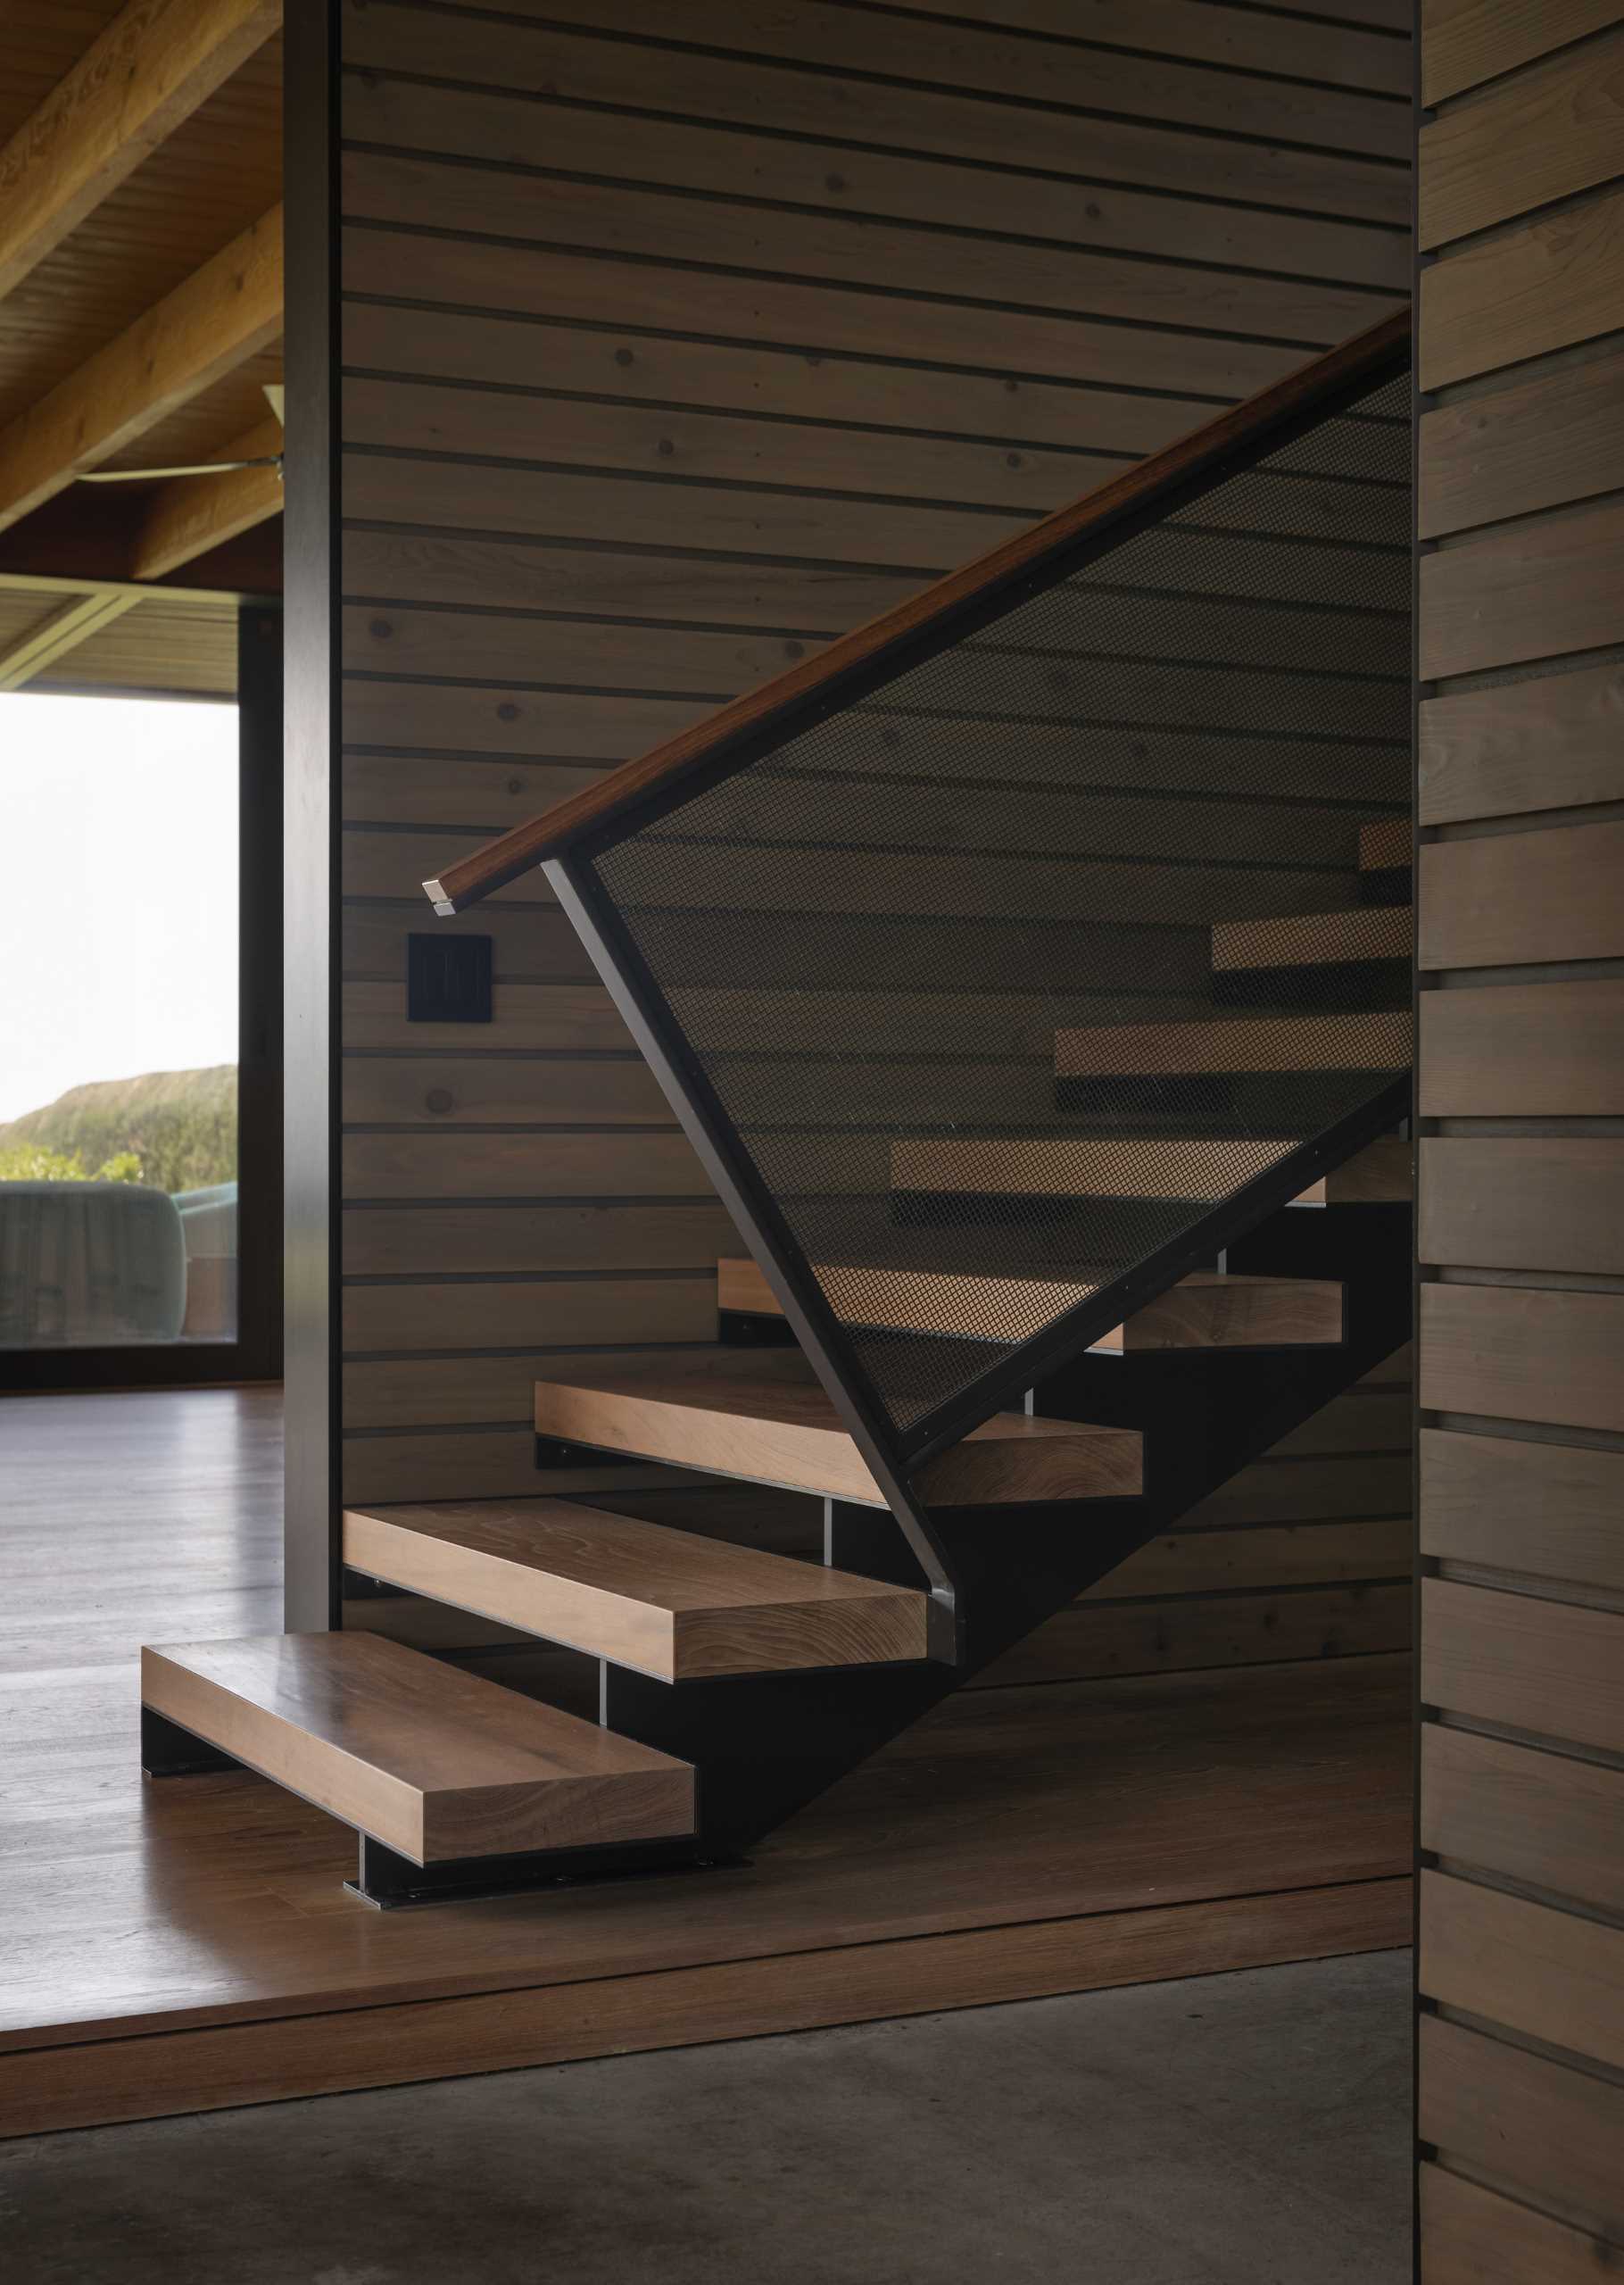 A modern home with wood and metal stairs.